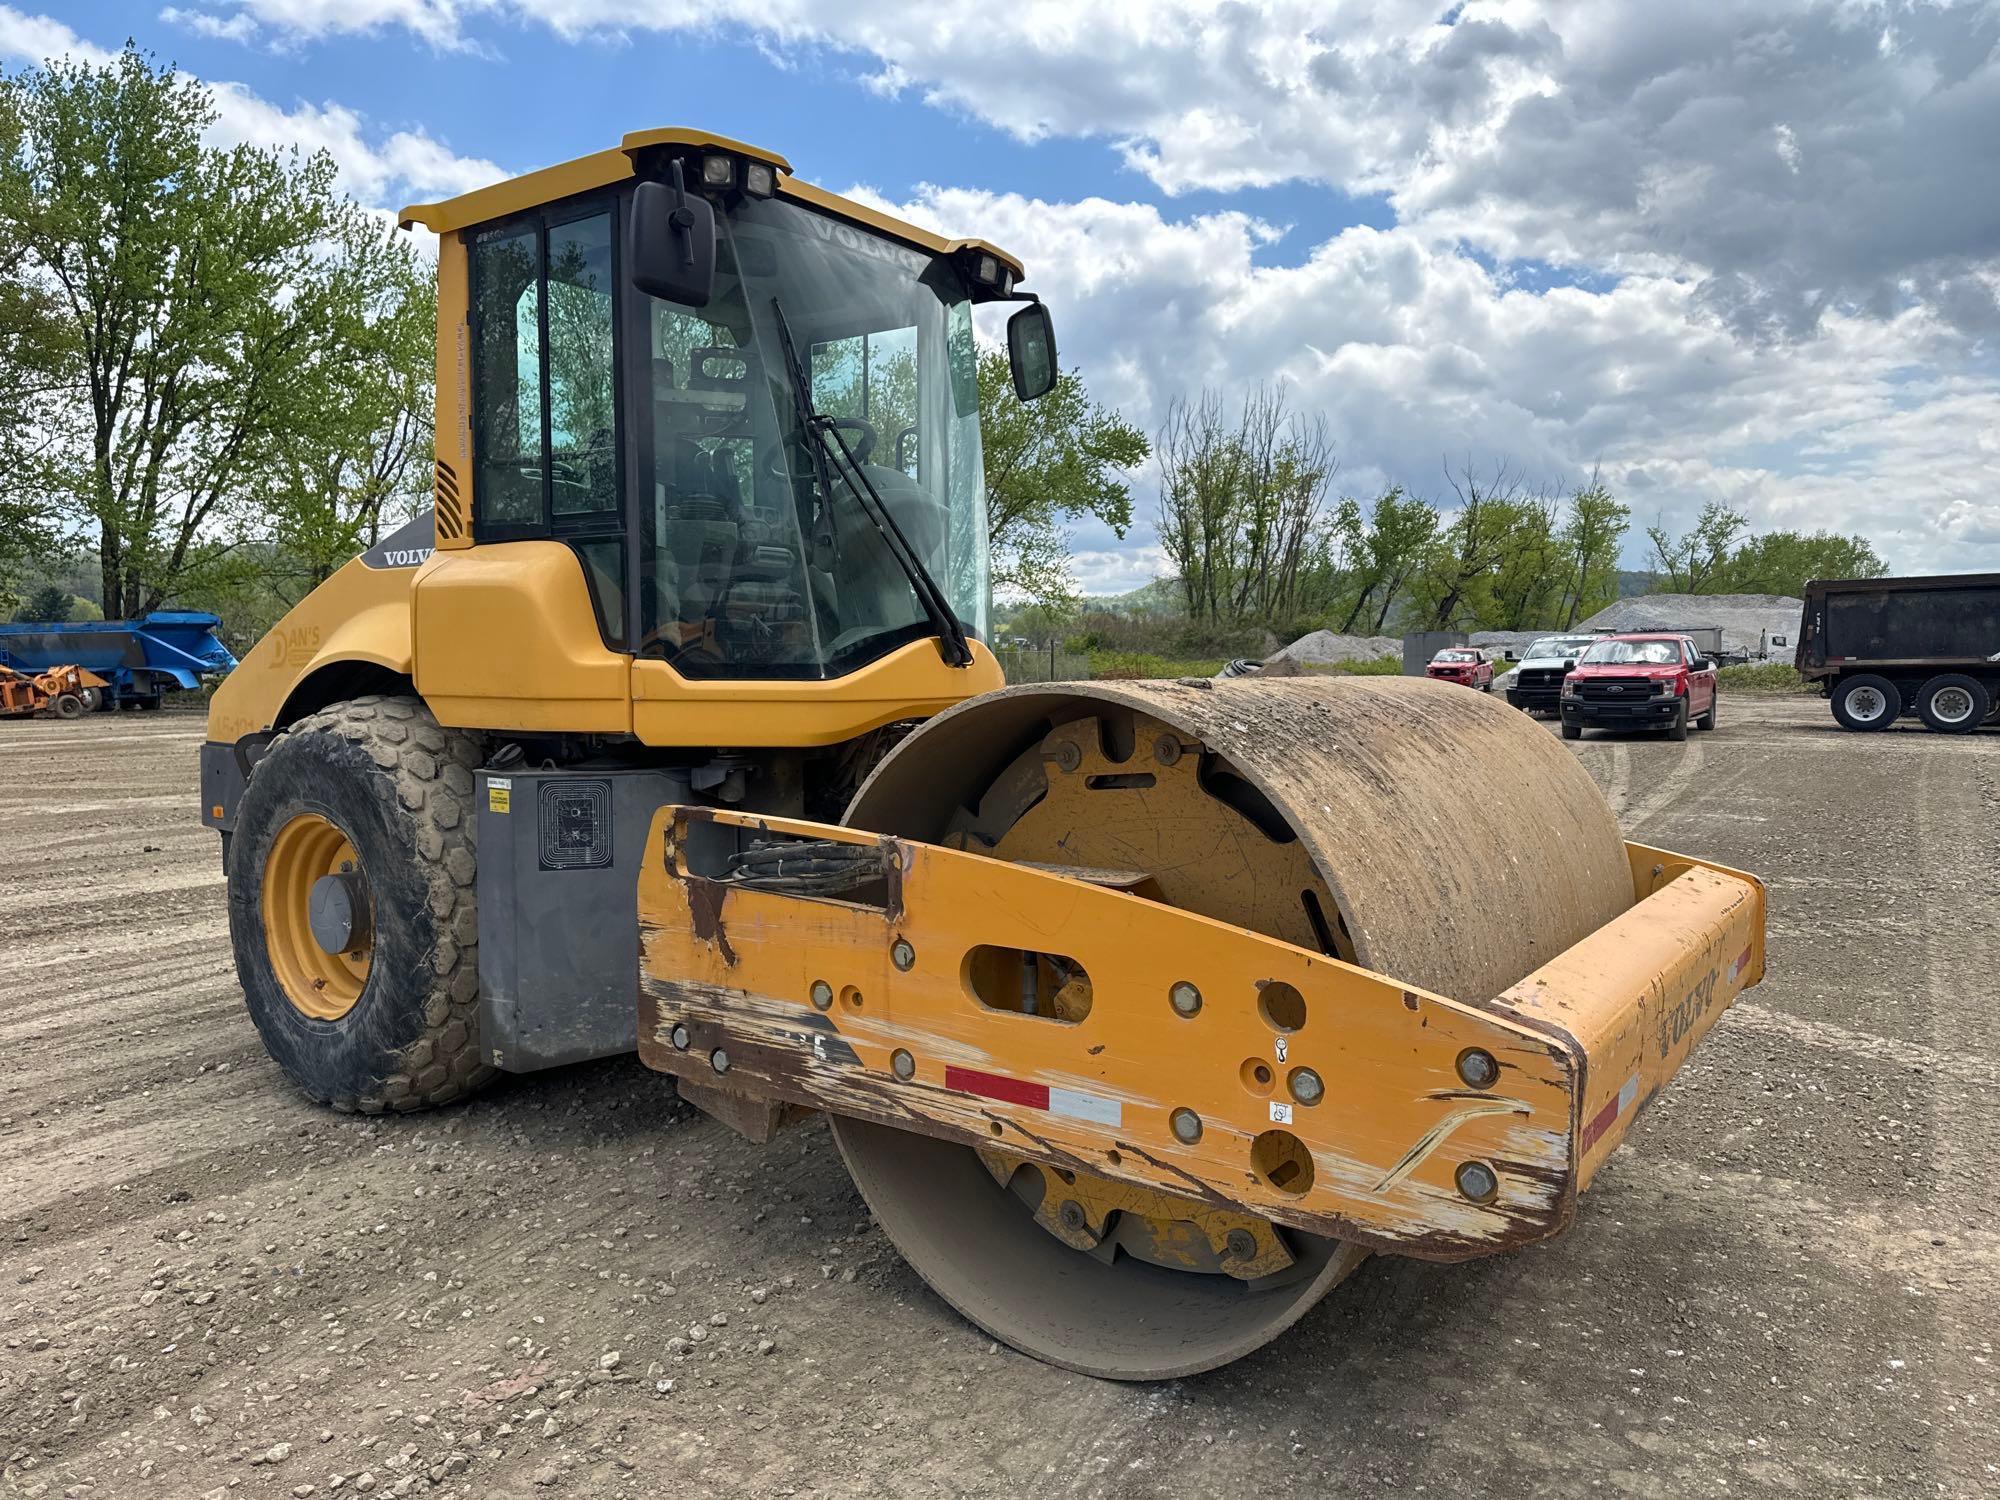 2014 VOLVO SD115 VIBRATORY ROLLER SN:551033 powered by Cummins diesel engine, equipped with EROPS,